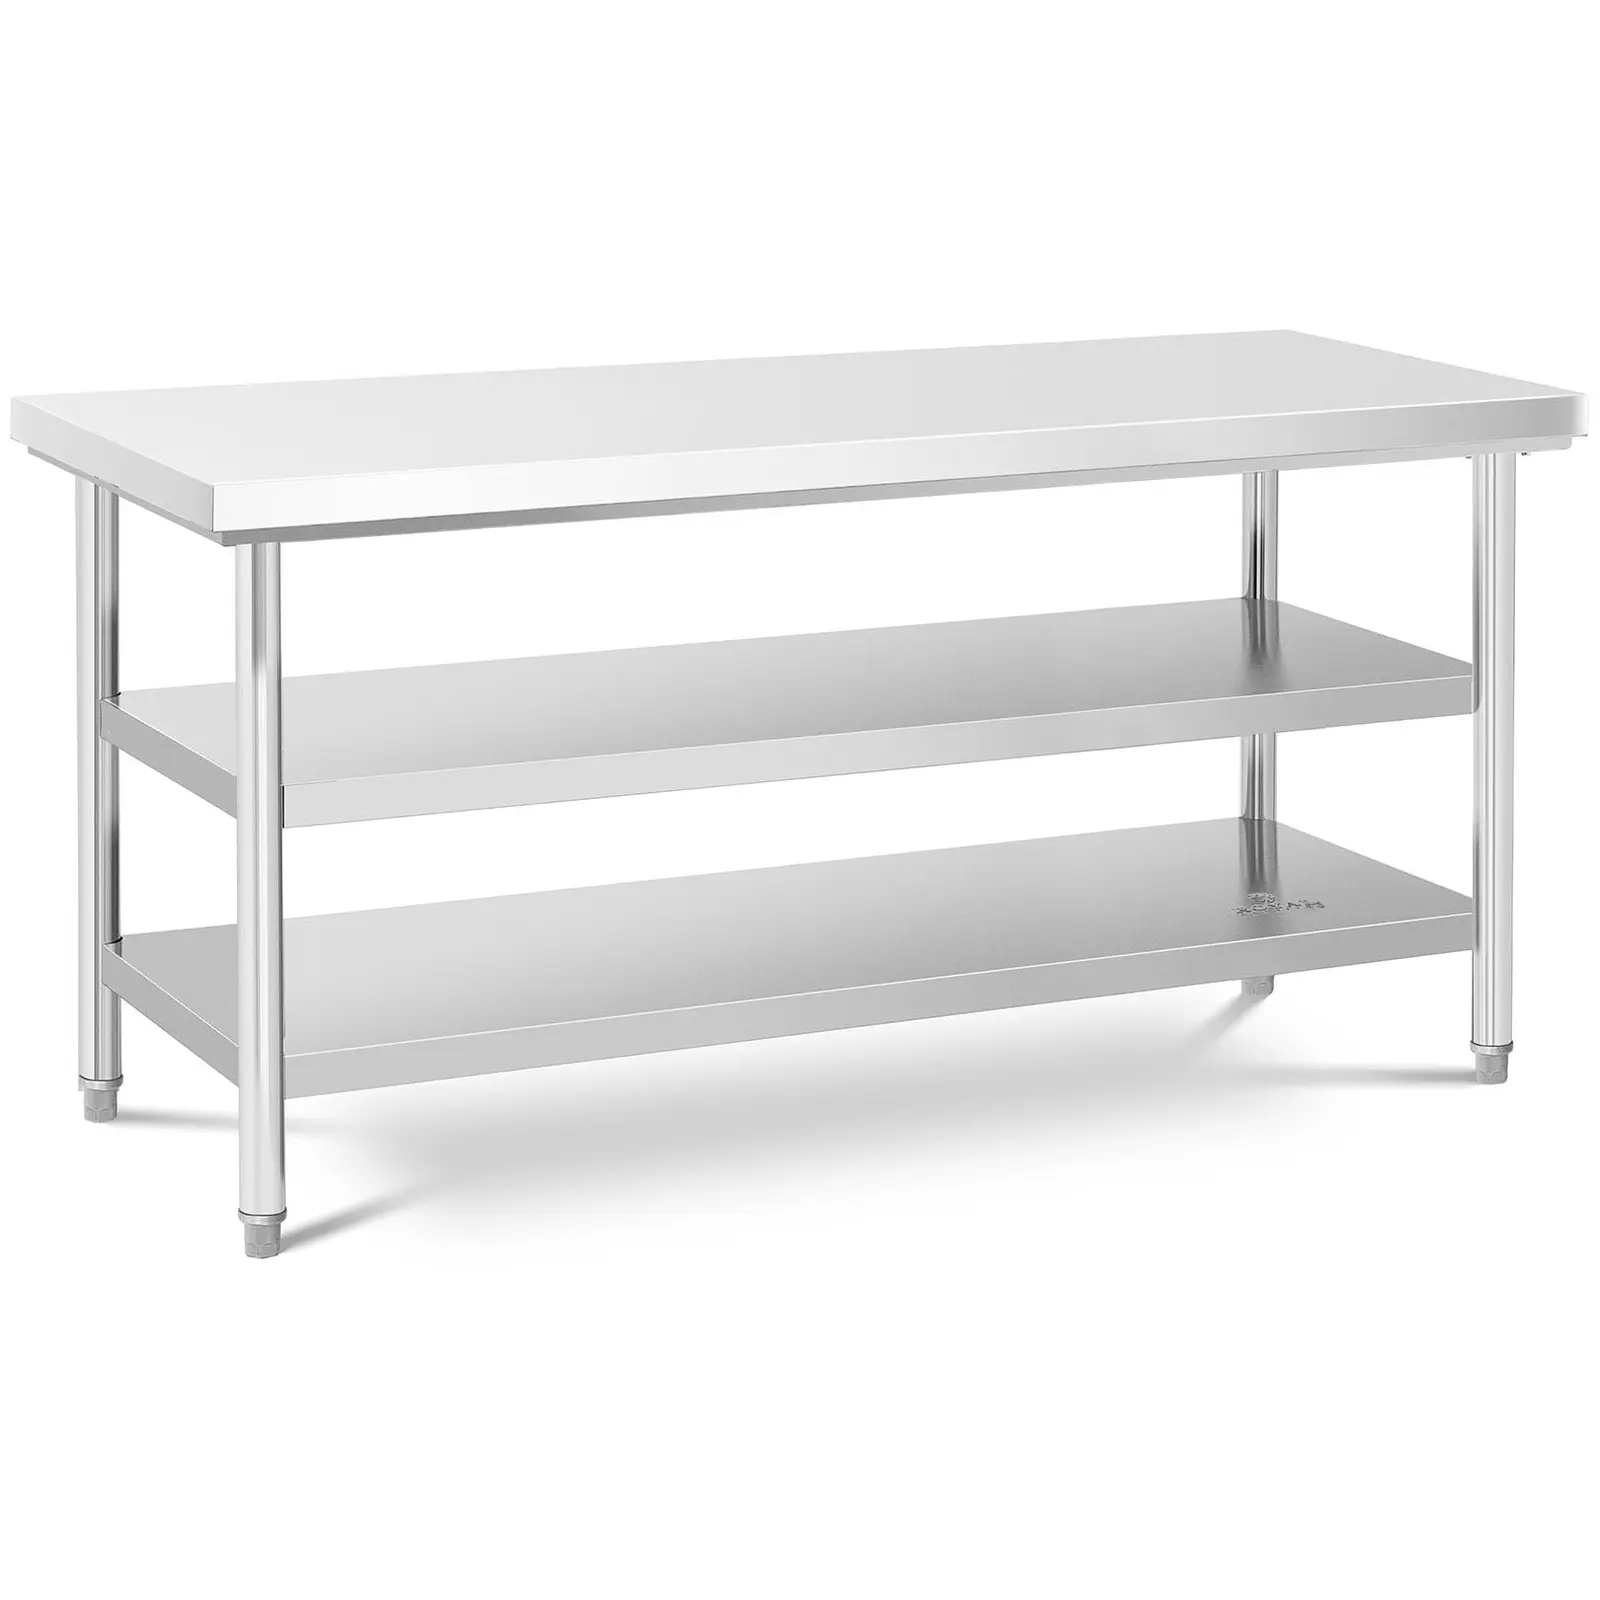 Stainless Steel Work Table - 60 x 180 cm - 600 kg - 3 levels